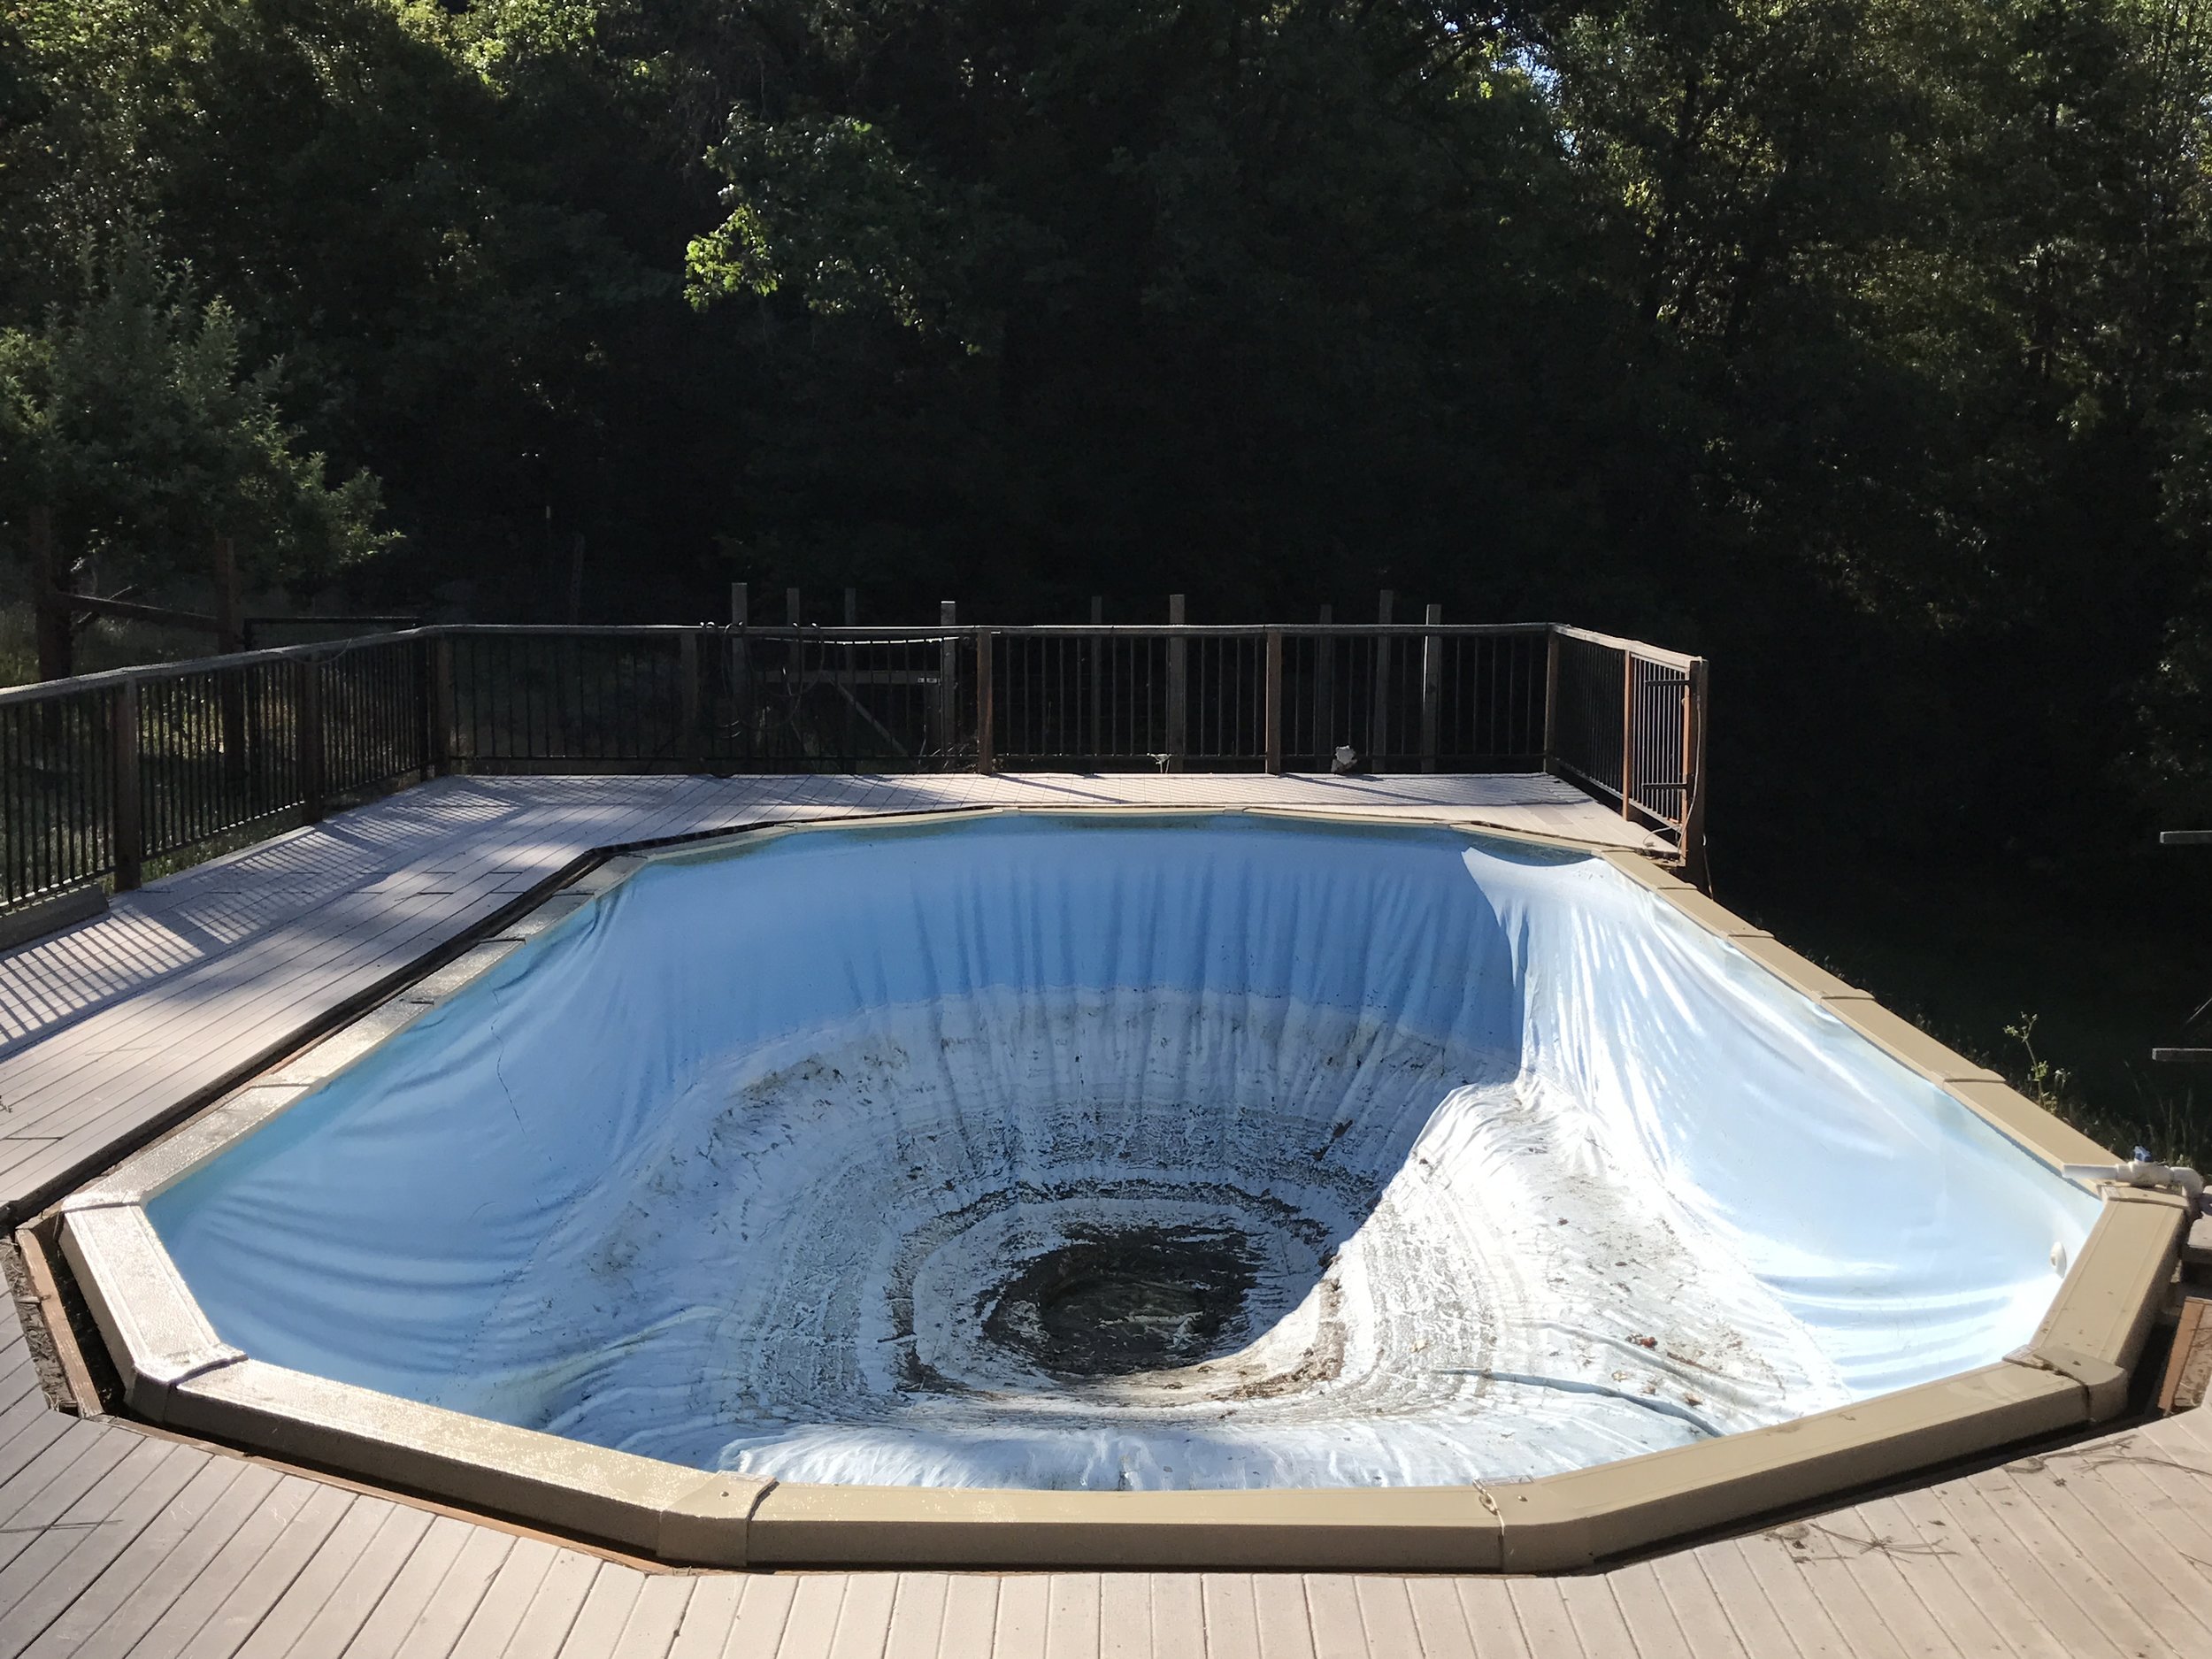  Installing Above Ground Swimming Pool Liner with Simple Decor